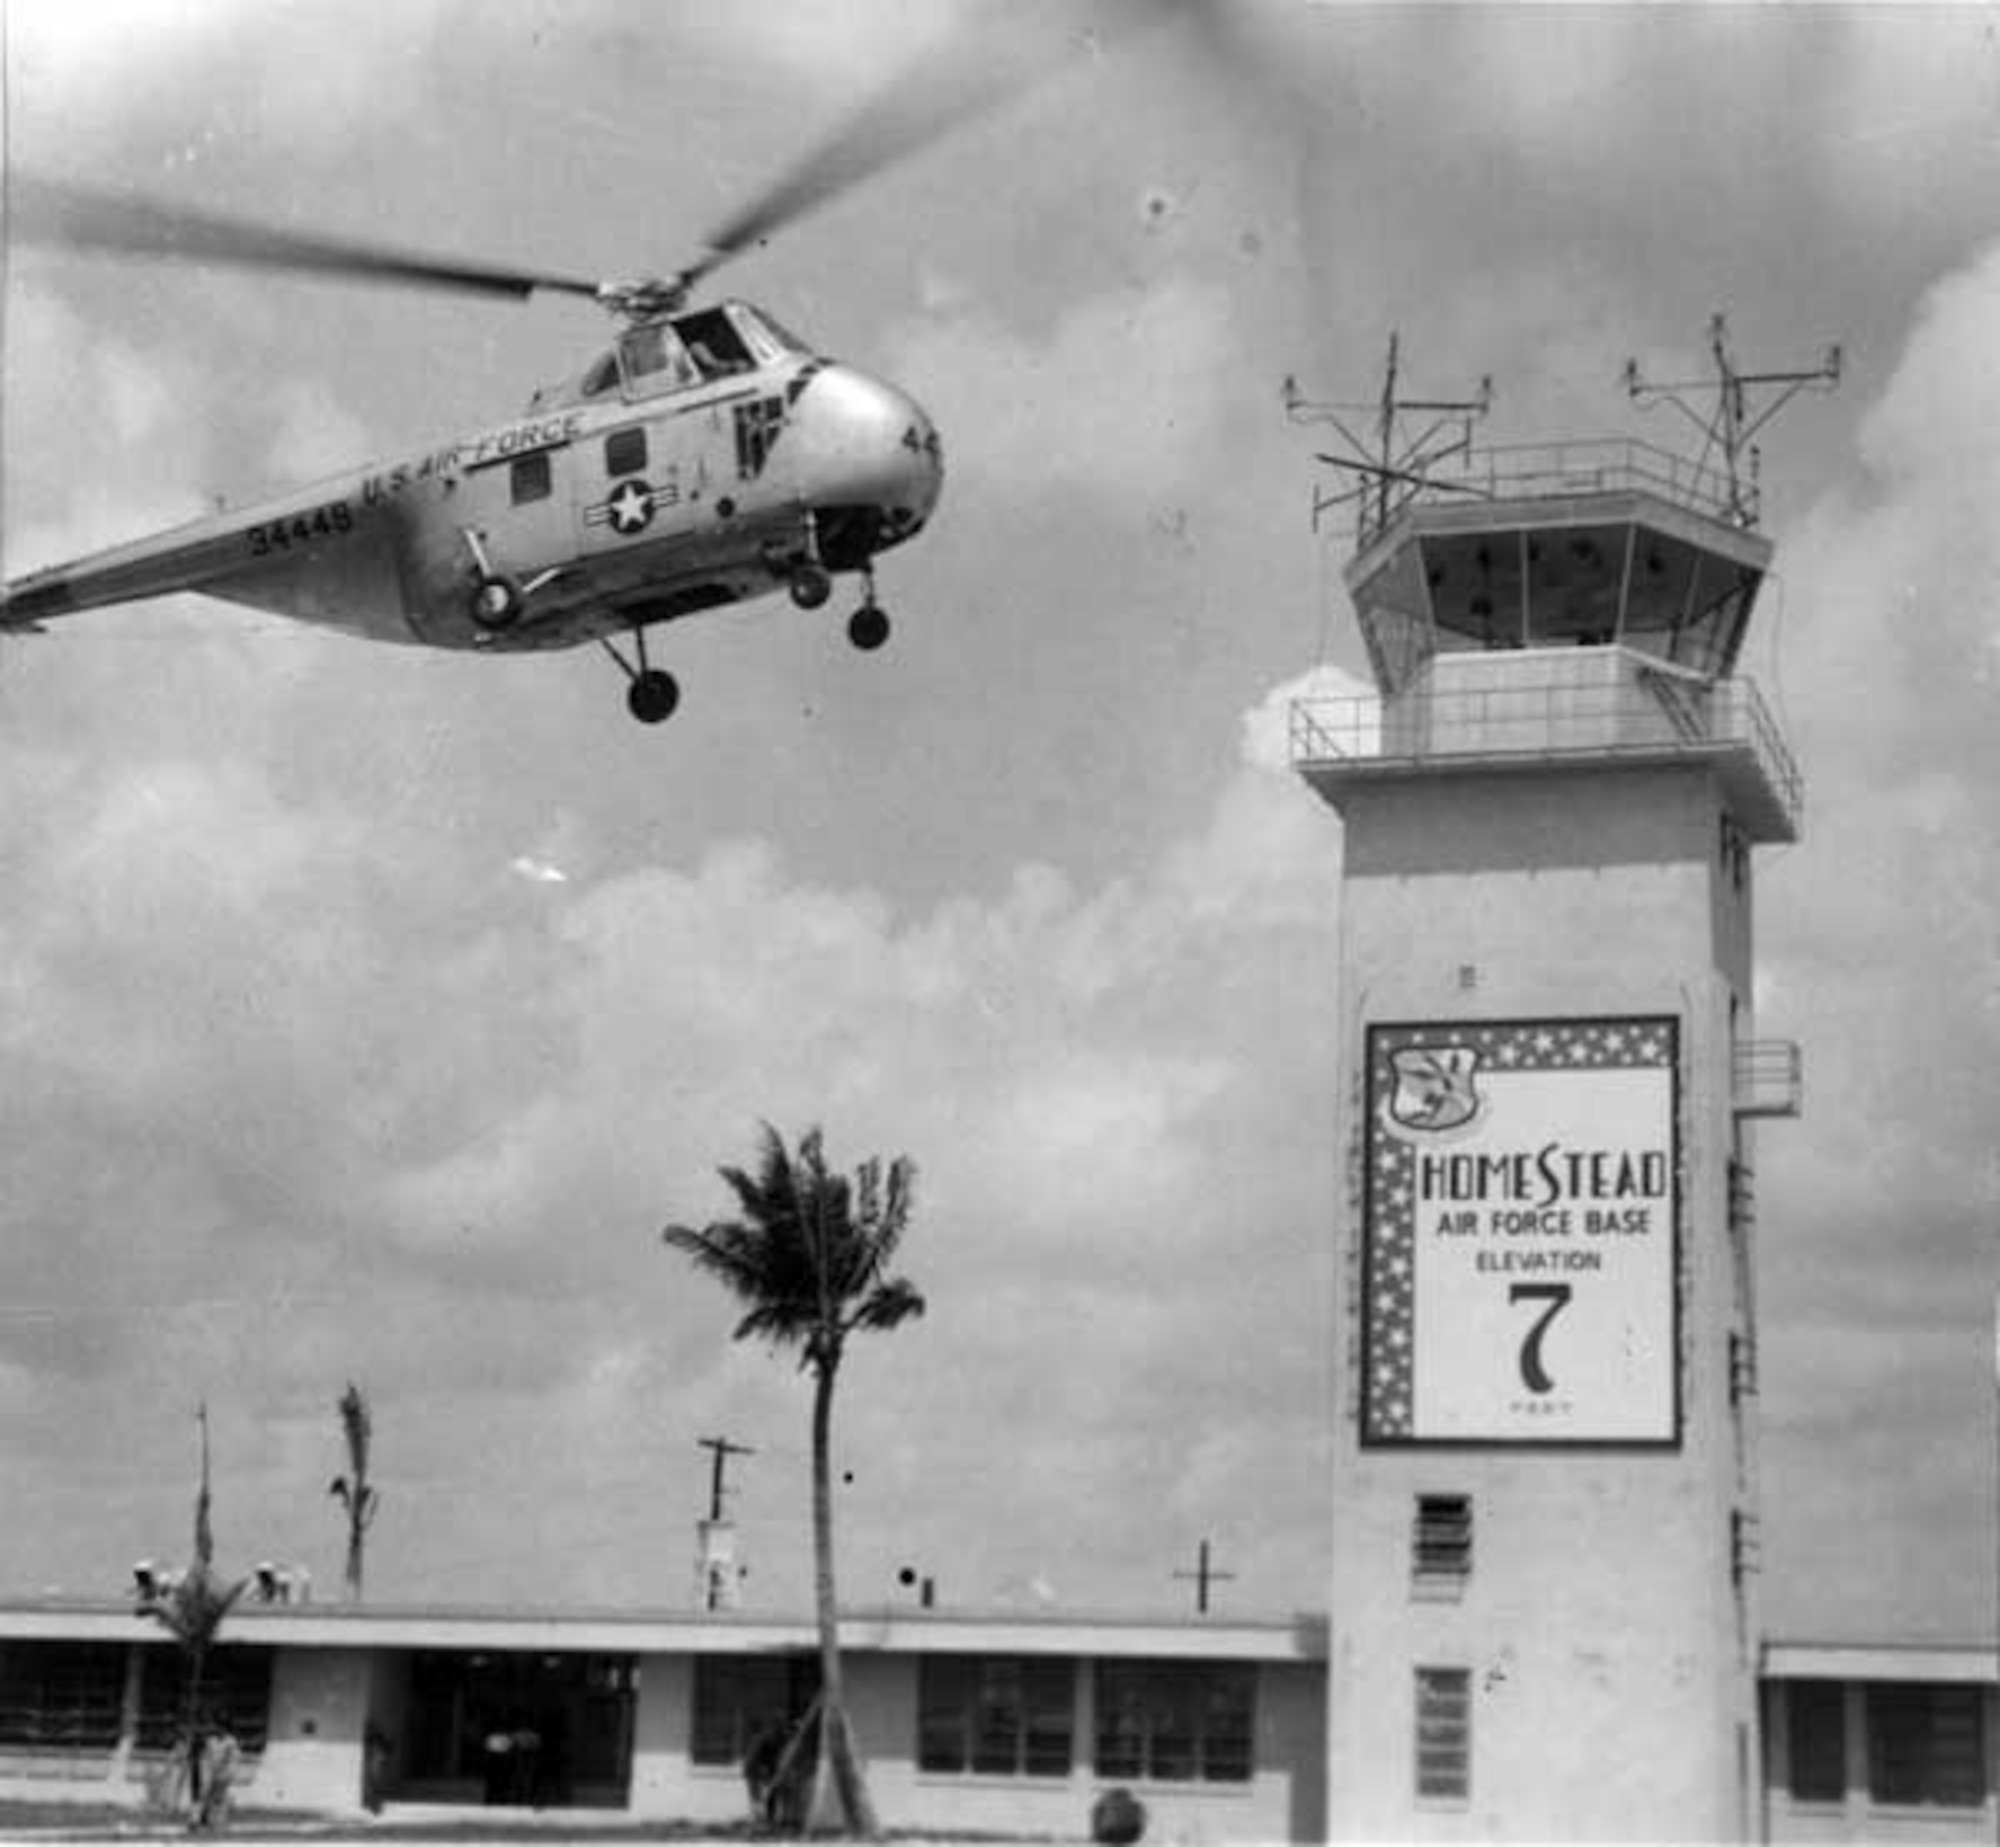 A Sikorsky H-34 “Choctaw” helicopter takes off from HAFB circa 1967